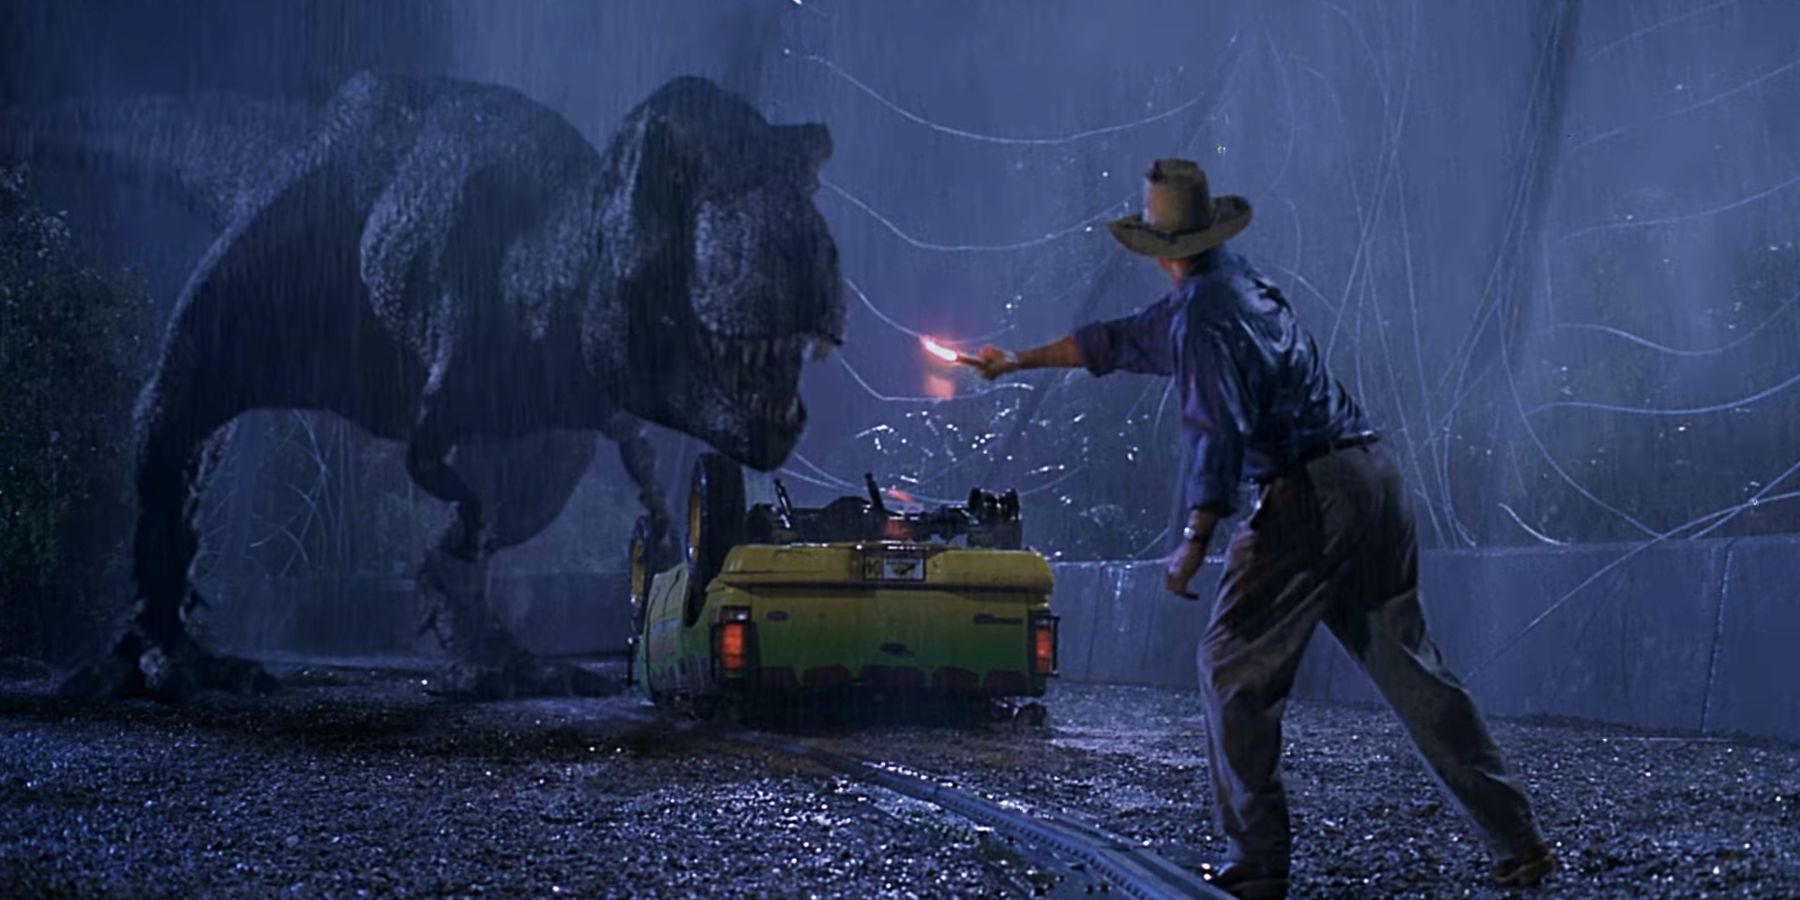 Alan Grant luring Rexy the T Rex with a flare in Jurassic Park